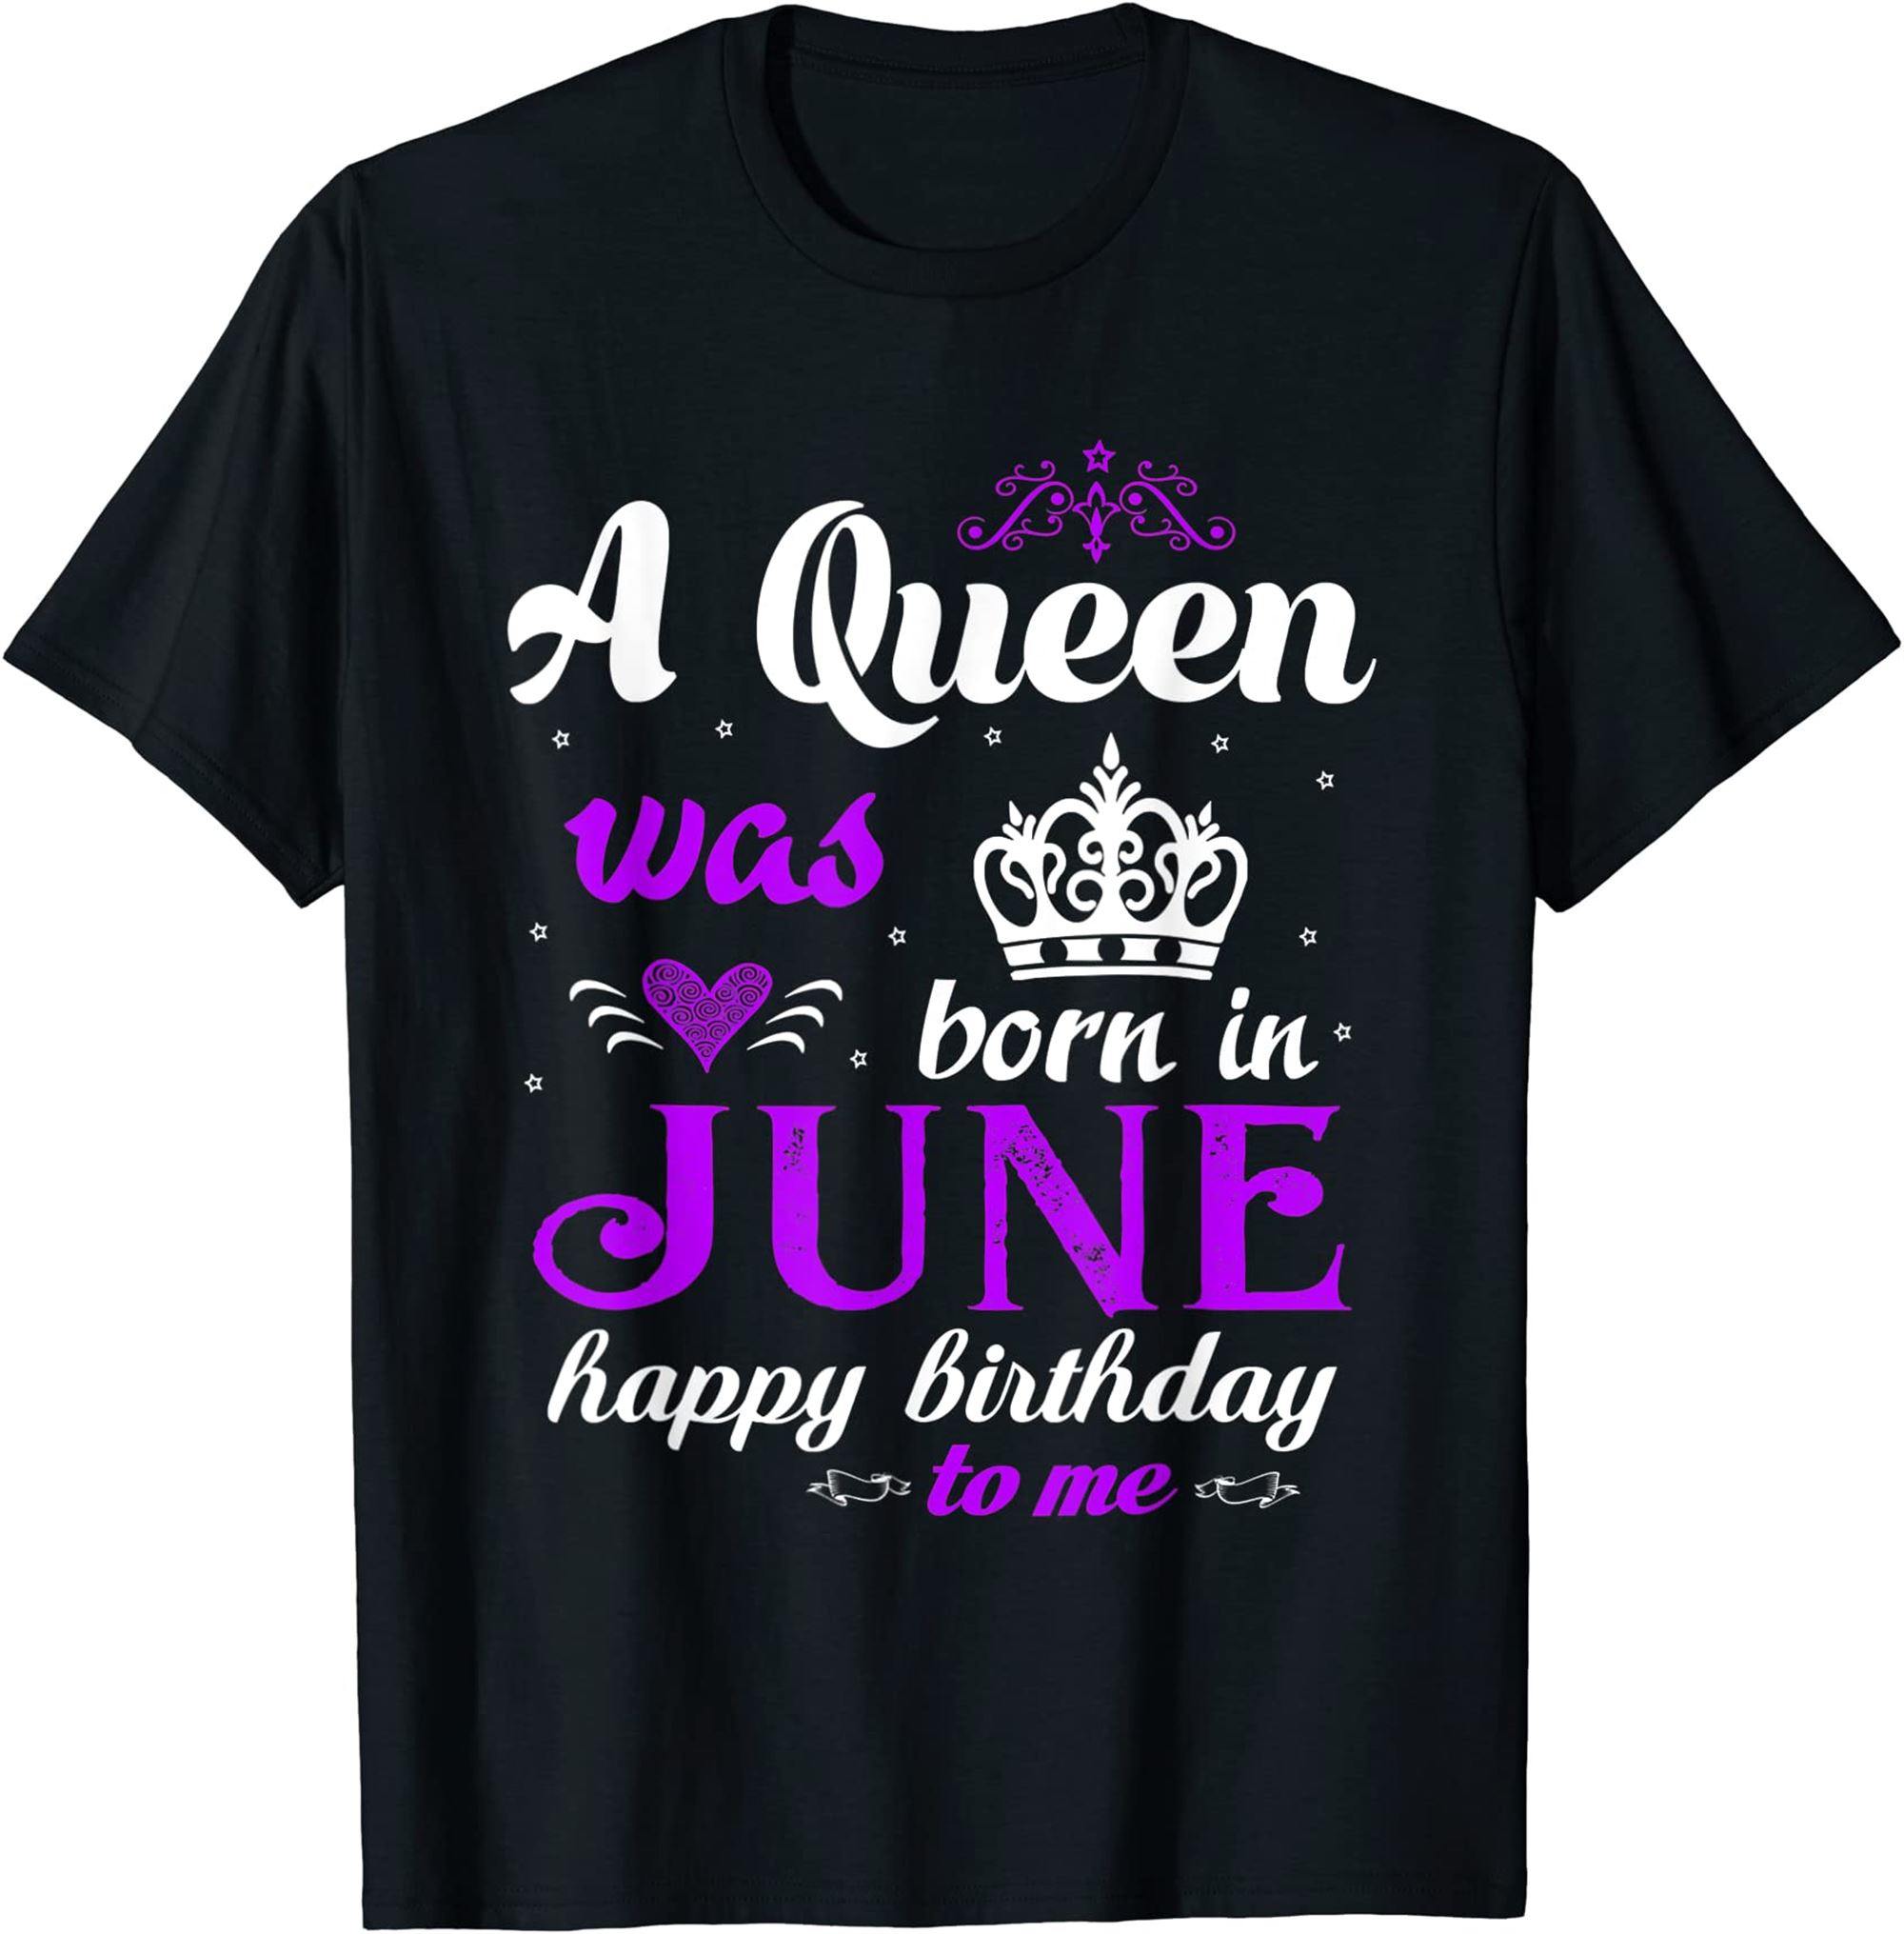 A Queen Was Born In June Happy Birthday Shirt For Girl T-shirt Size Up To 5xl